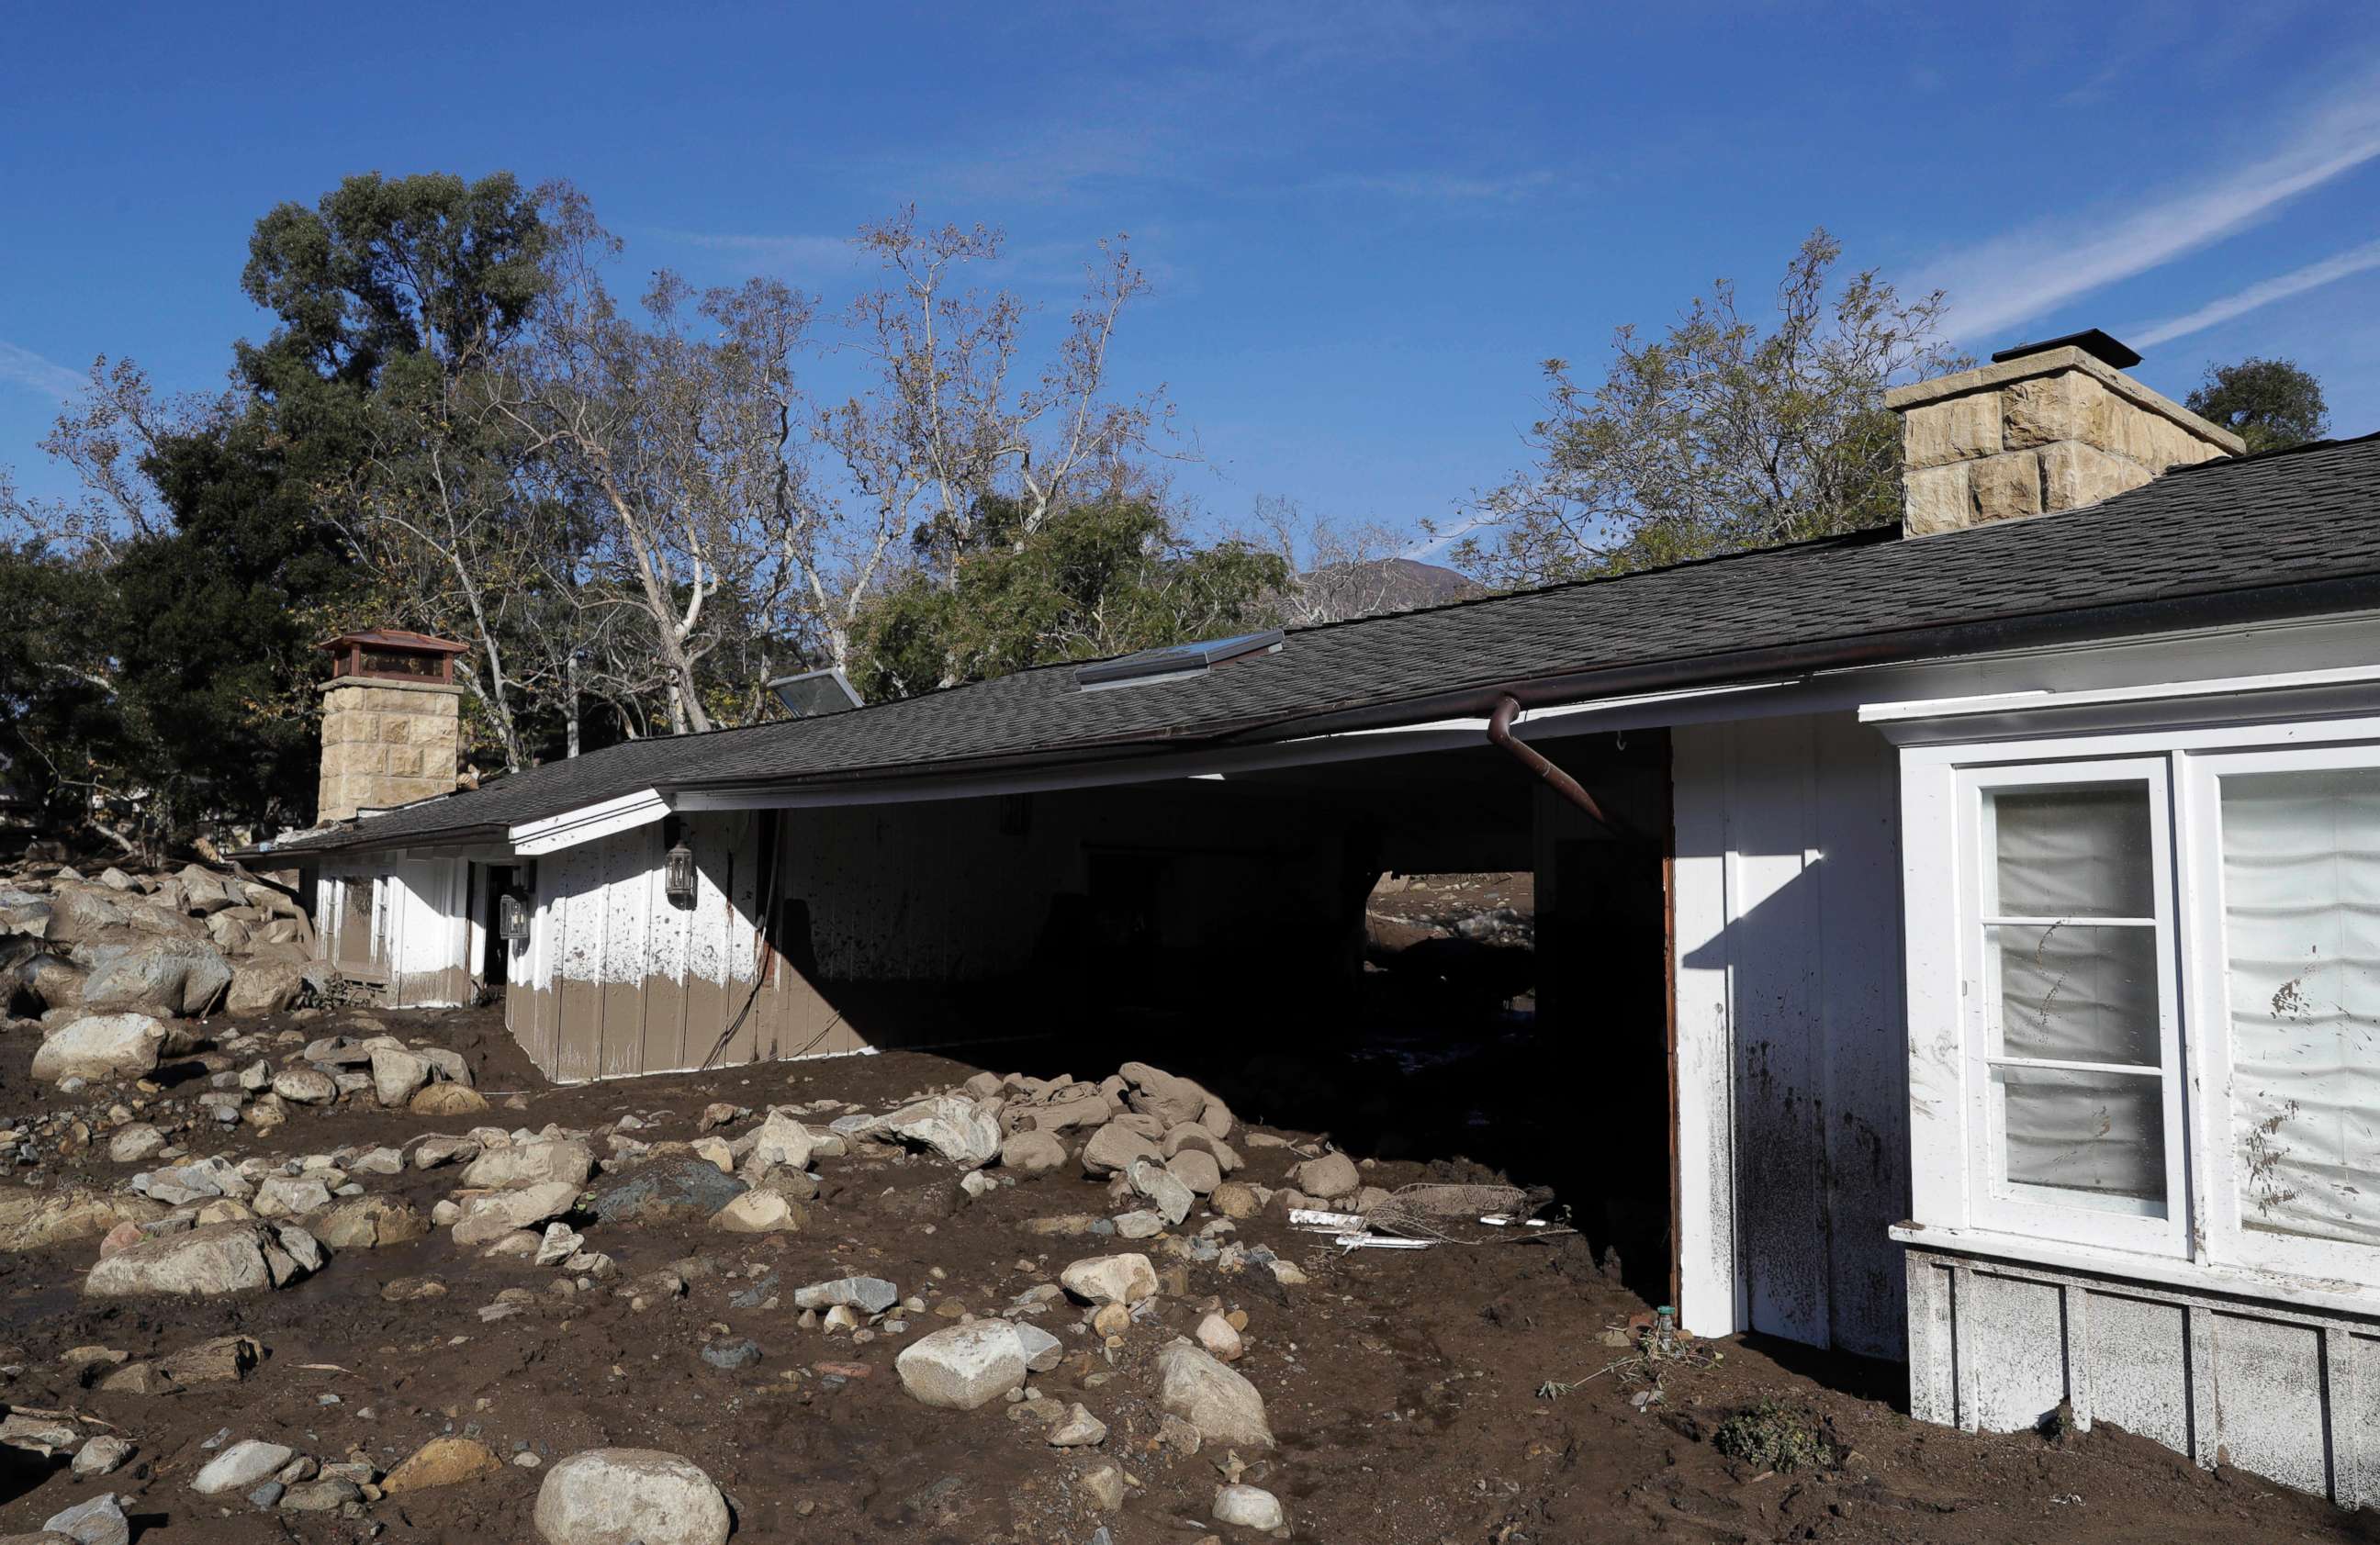 PHOTO: Mud and rocks are shown at a home damaged by storms in Montecito, Calif., Jan. 12, 2018. The mudslide, touched off by heavy rain, took many homeowners by surprise early Tuesday, despite warnings issued days in advance.